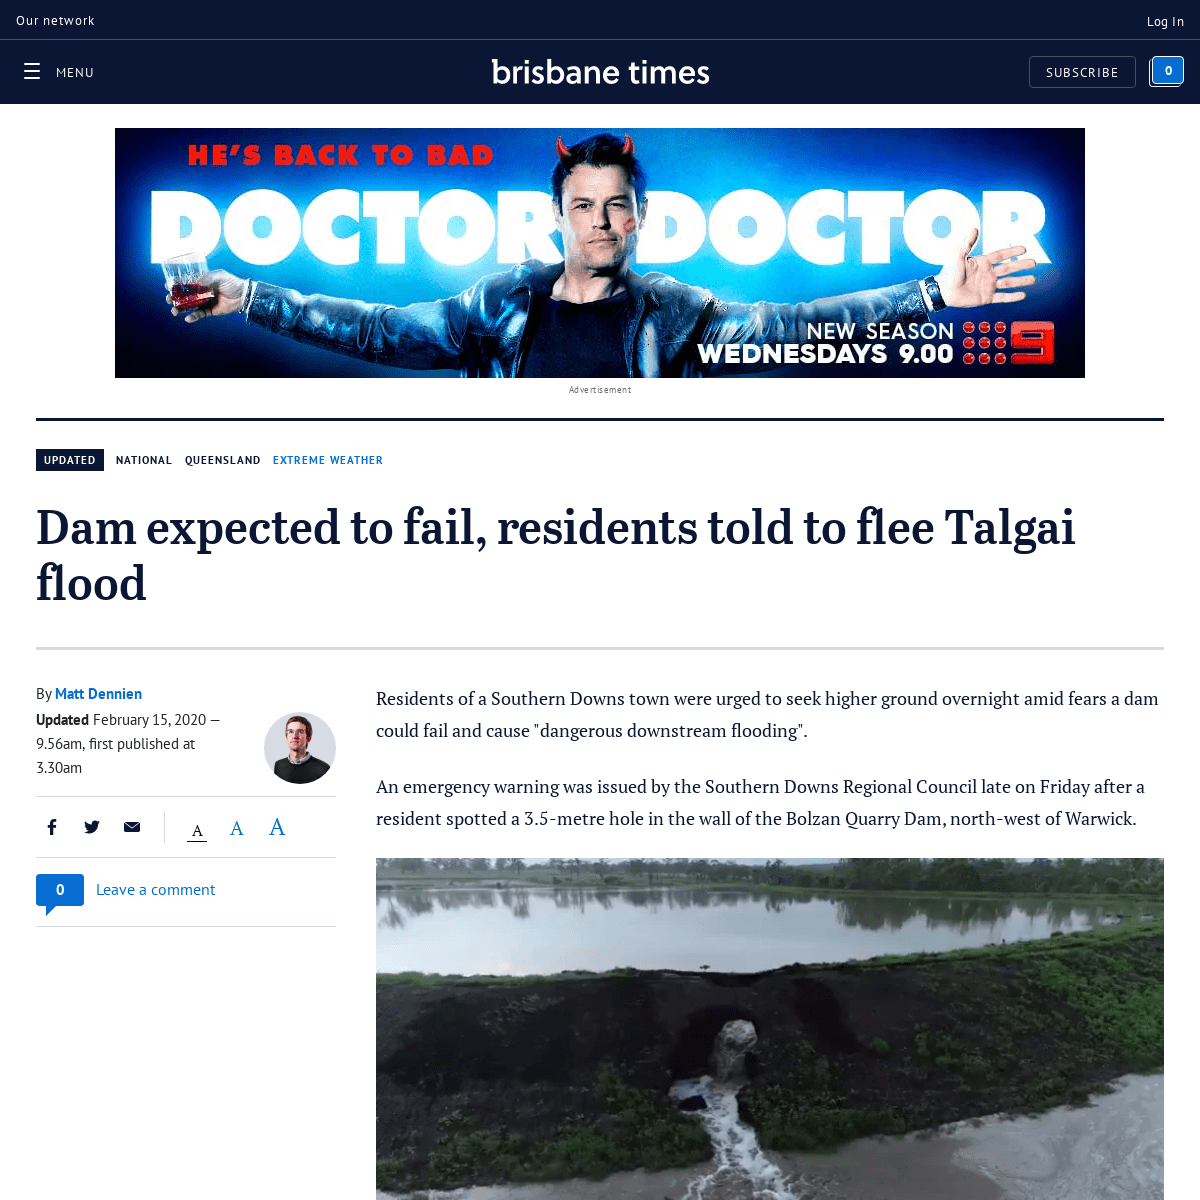 A complete backup of www.brisbanetimes.com.au/national/queensland/dam-expected-to-fail-residents-told-to-flee-talgai-flood-20200